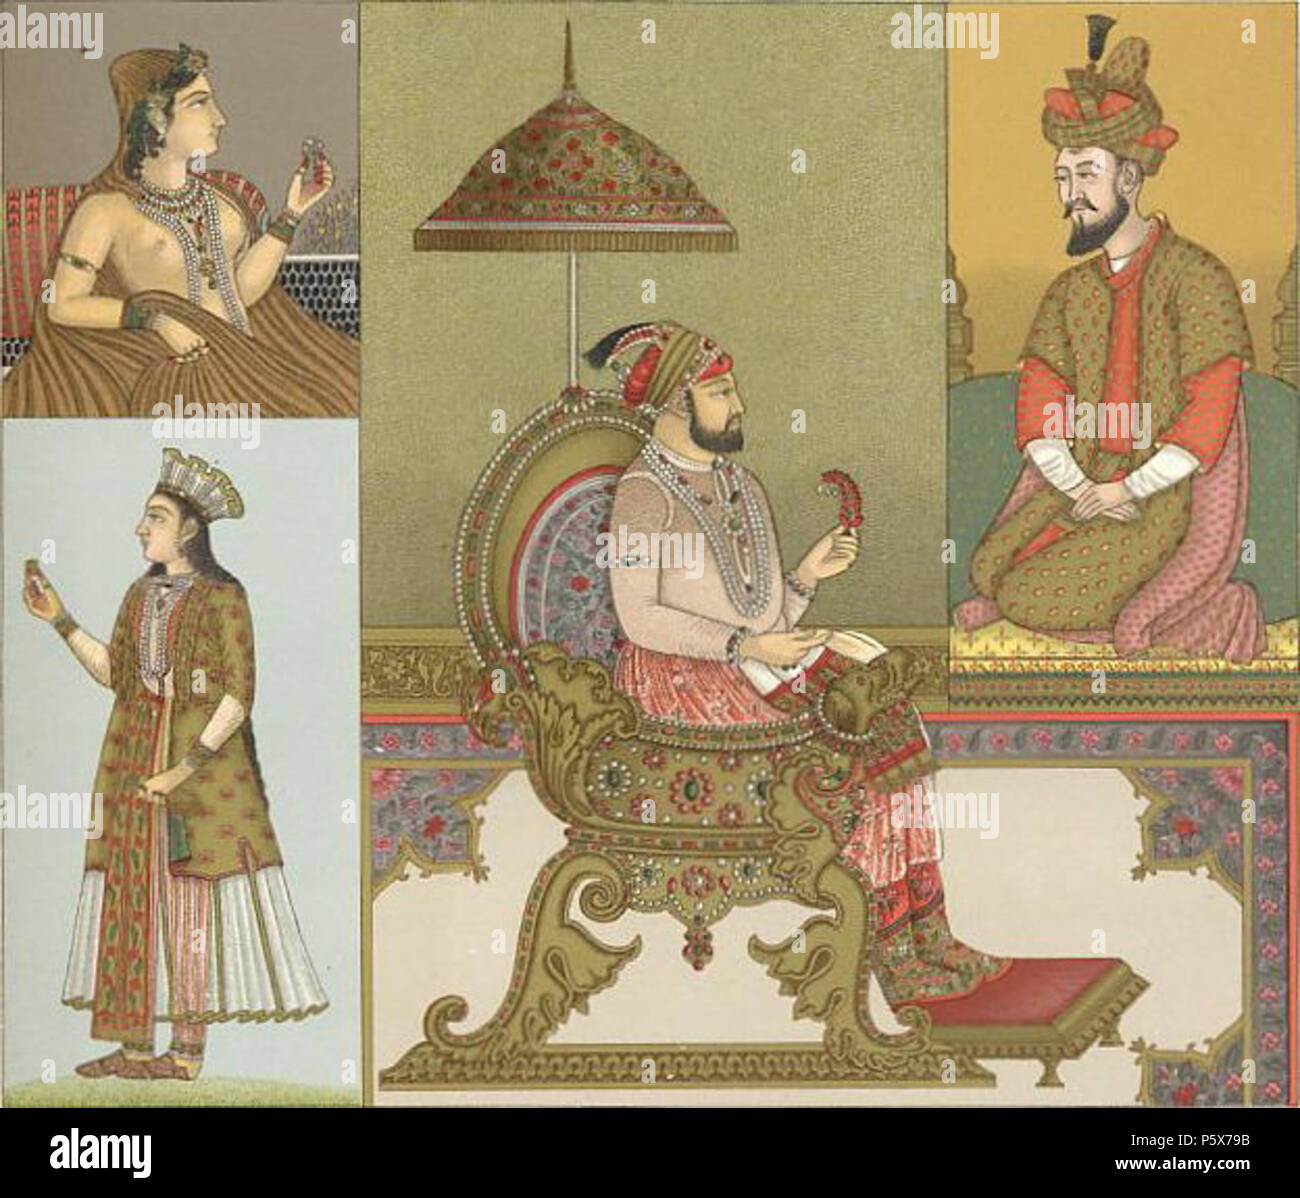 N/A.  English: Costume of India - Moguls. A Mogul woman (upper left) who has colored her upper body and face yellow with saffron dye. The Mogul Emperor Farouksiar (center), who died in 1719, and the Emperor Houmaioun (upper right), who died in 1556. . 1888. N/A 383 Costume of India - Moguls Stock Photo